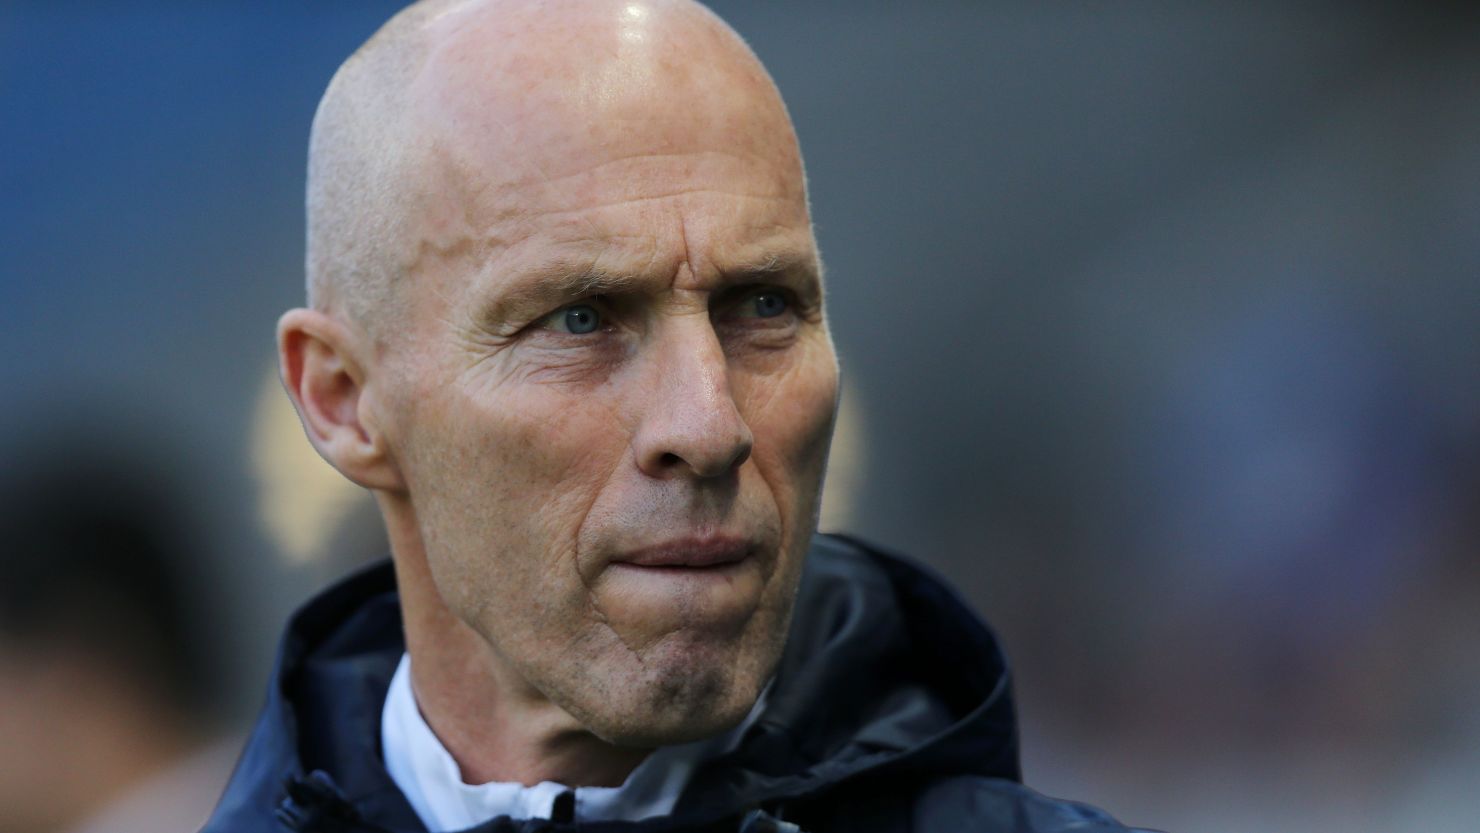 Bob Bradley oversaw a run of seven league defeats during his 11 games in charge at Swansea City